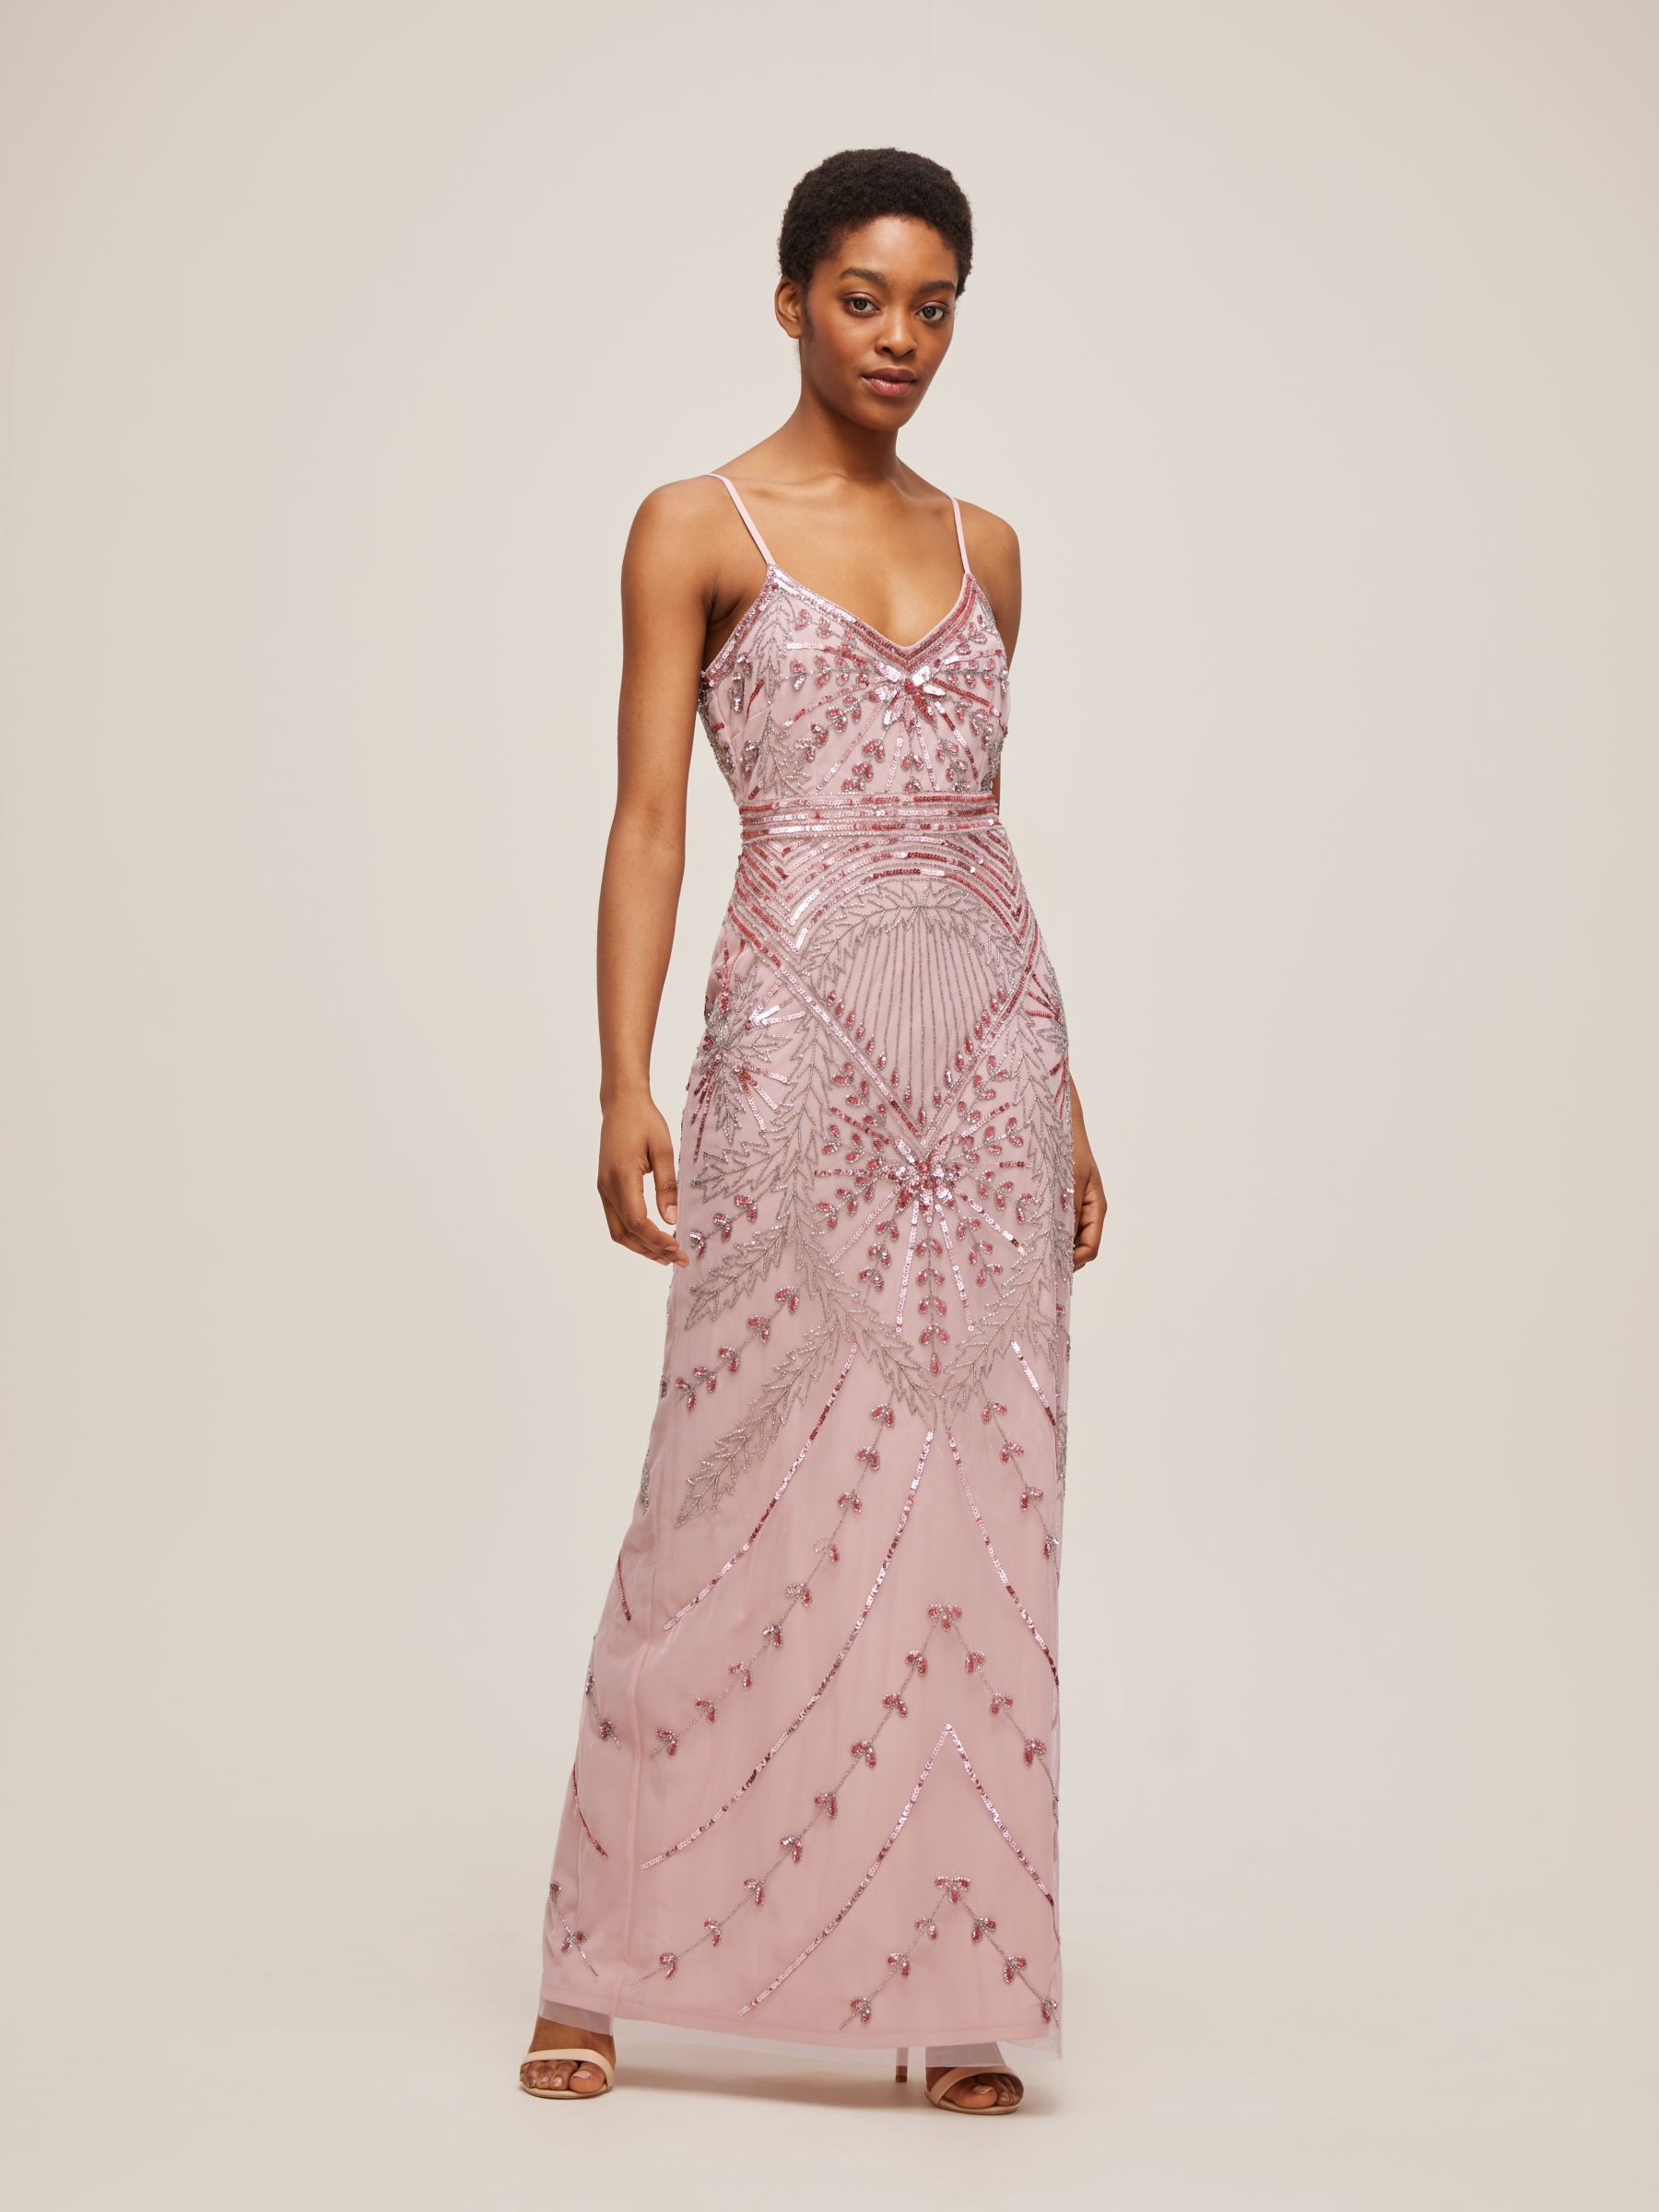 Lace & Beads Milan Sequin Embellished Maxi Dress